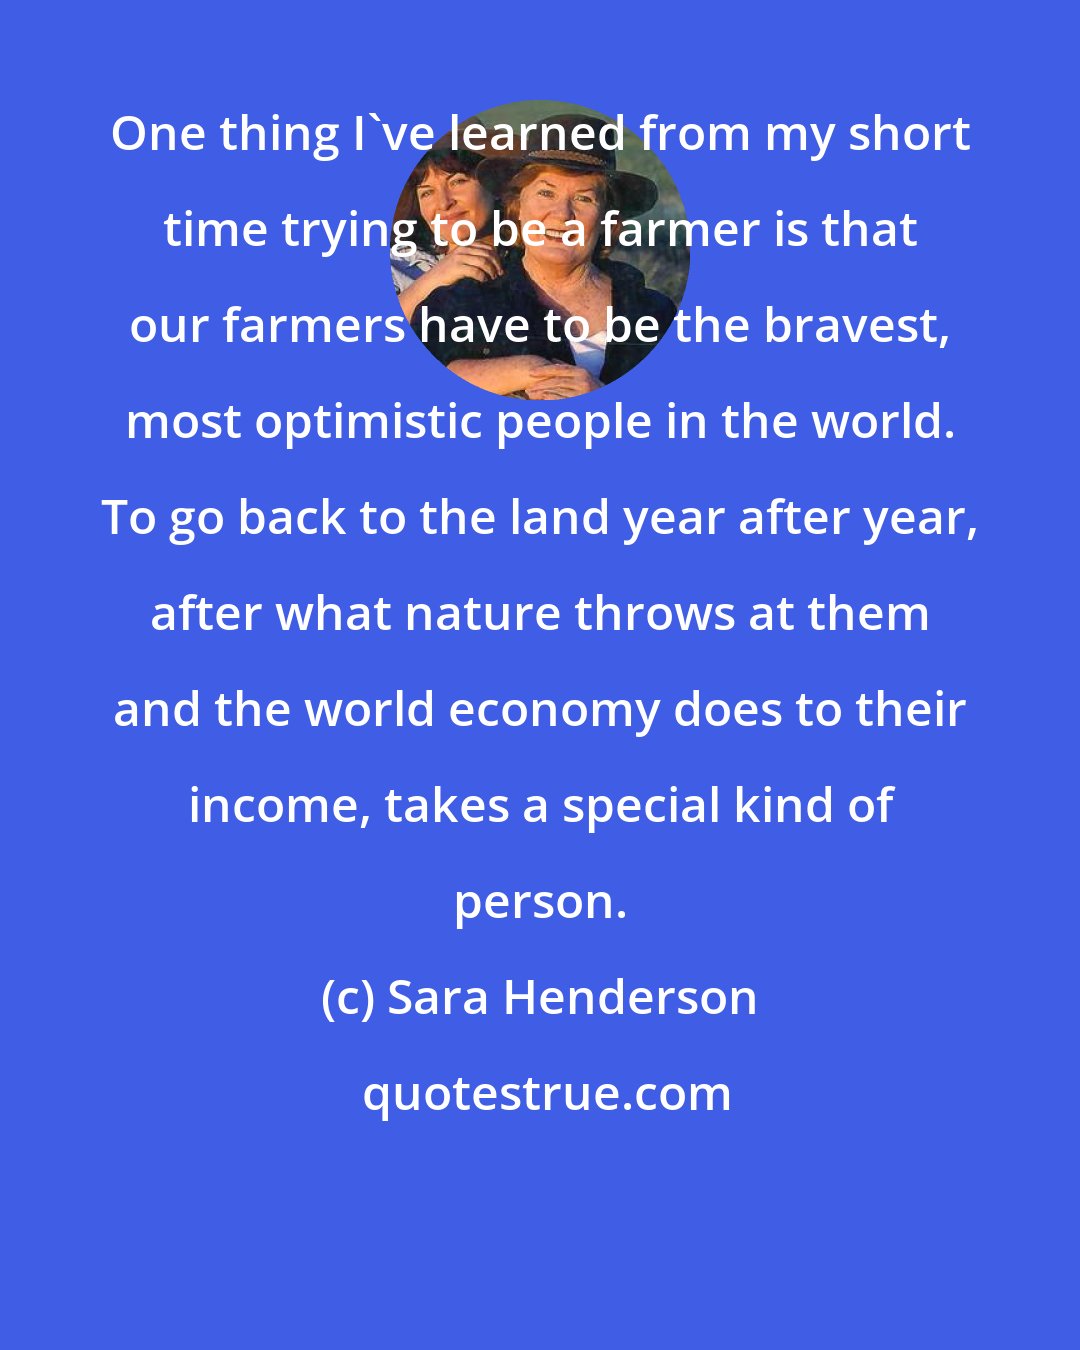 Sara Henderson: One thing I've learned from my short time trying to be a farmer is that our farmers have to be the bravest, most optimistic people in the world. To go back to the land year after year, after what nature throws at them and the world economy does to their income, takes a special kind of person.